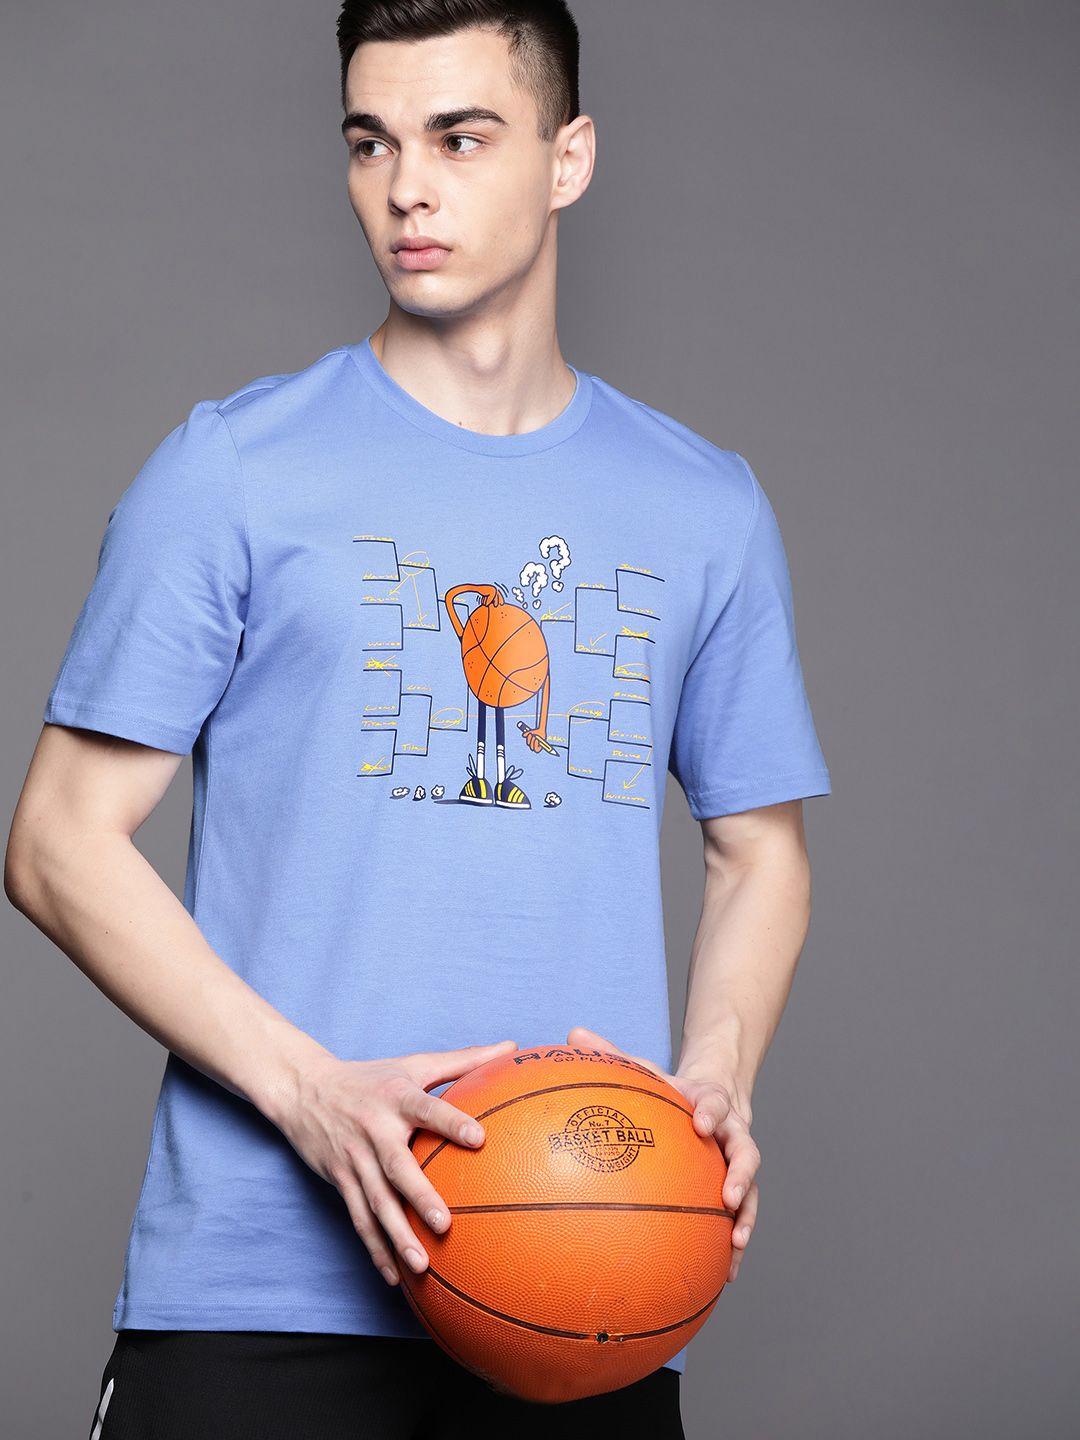 adidas sustainable pure cotton graphic printed basketball t-shirt